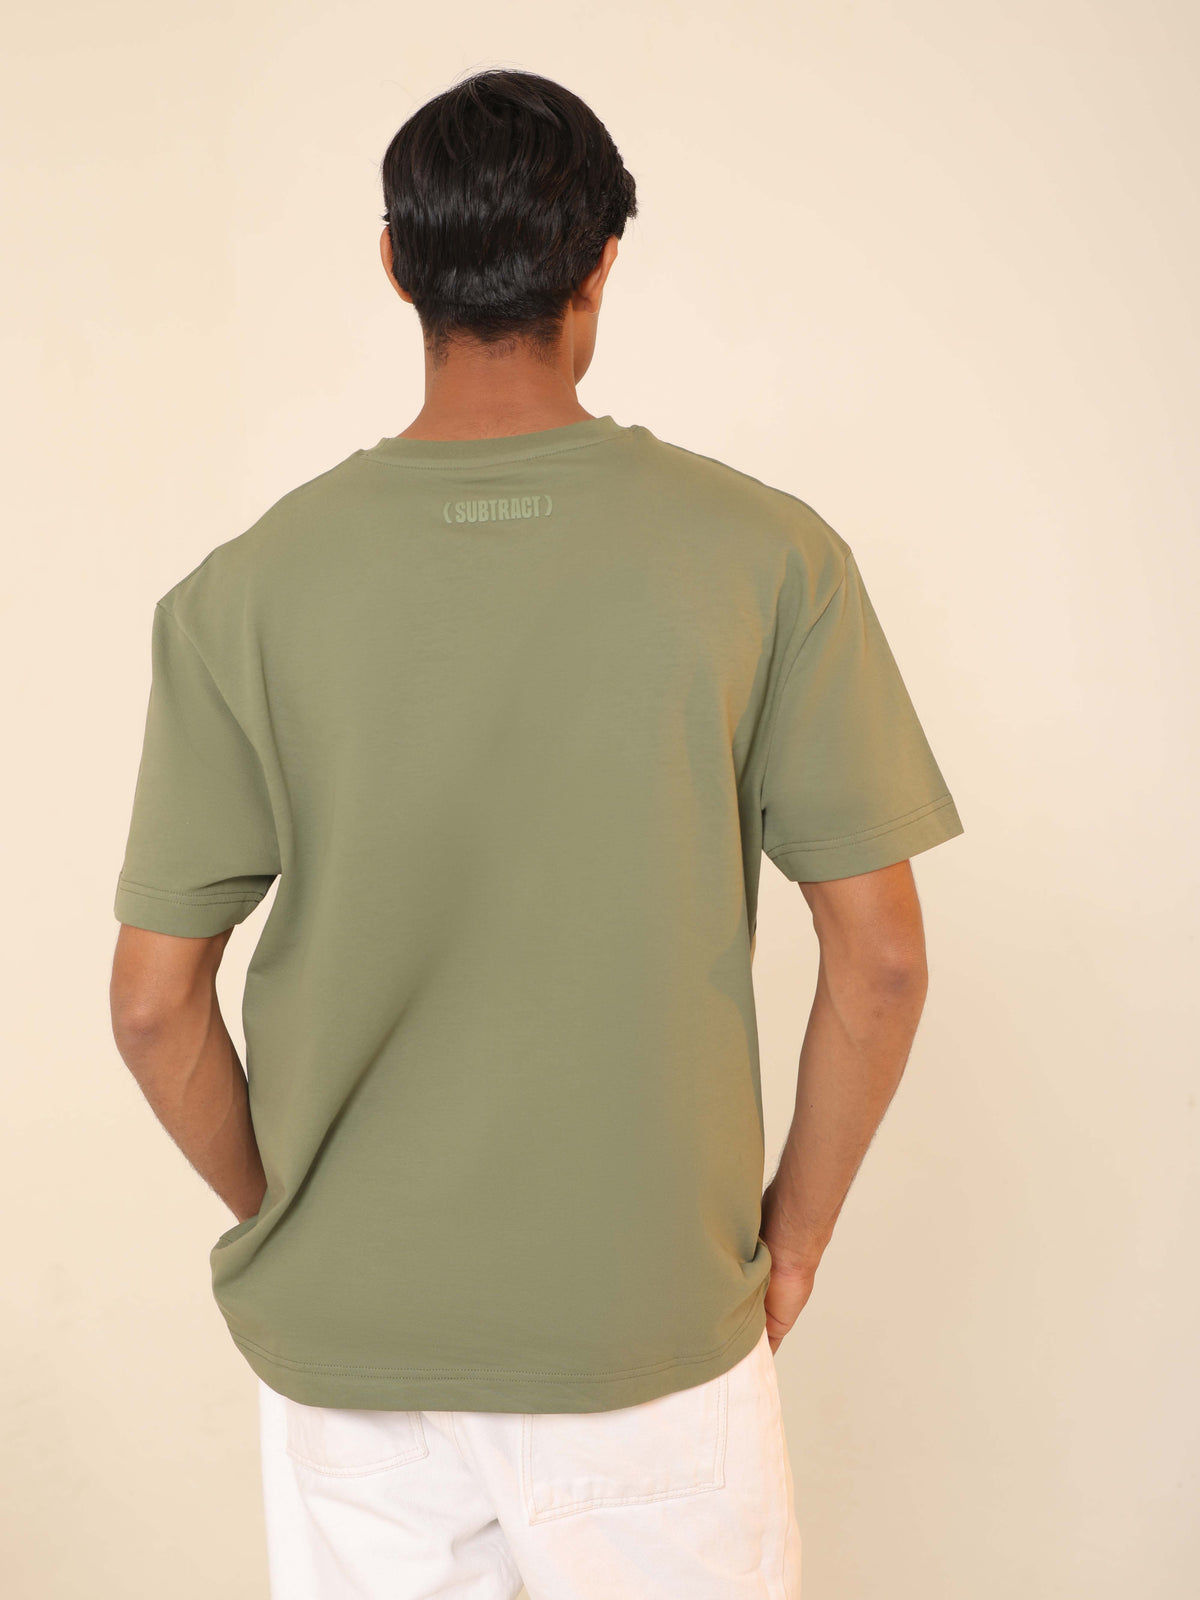 Oversized Round Neck T-Shirt in Olive Green